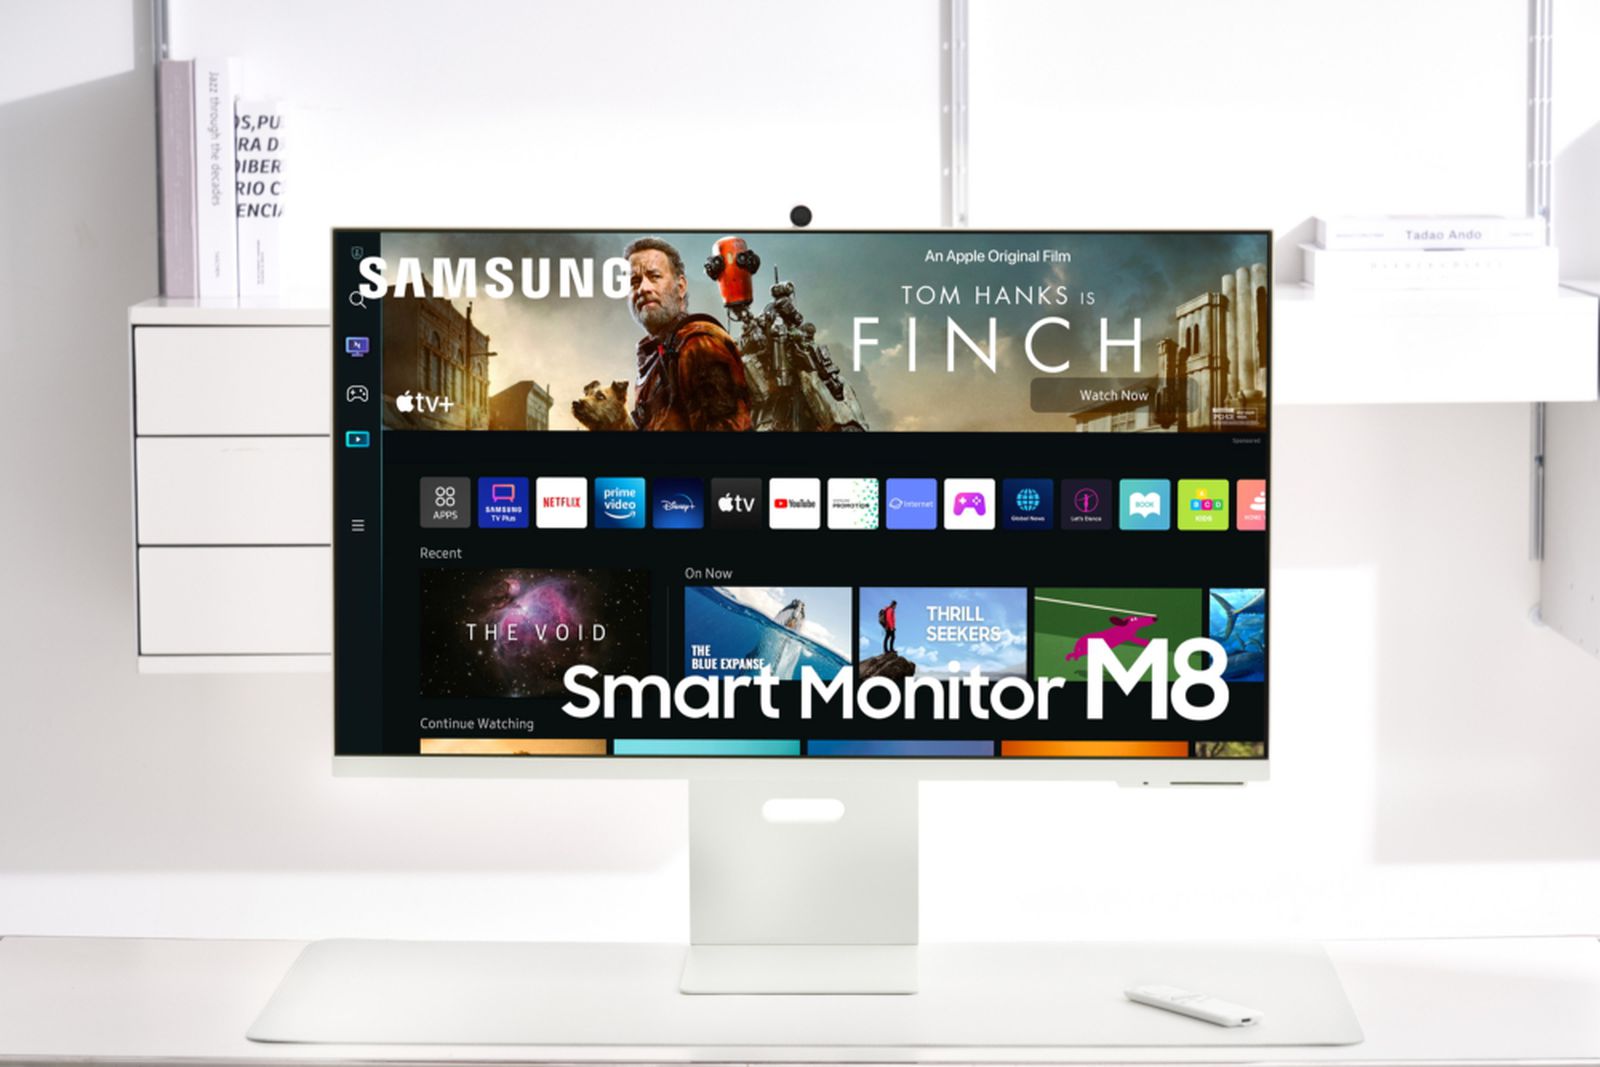 Samsung's iMac-Style 'Smart Monitor M8' With AirPlay Now Available to Pre-Order - macrumors.com